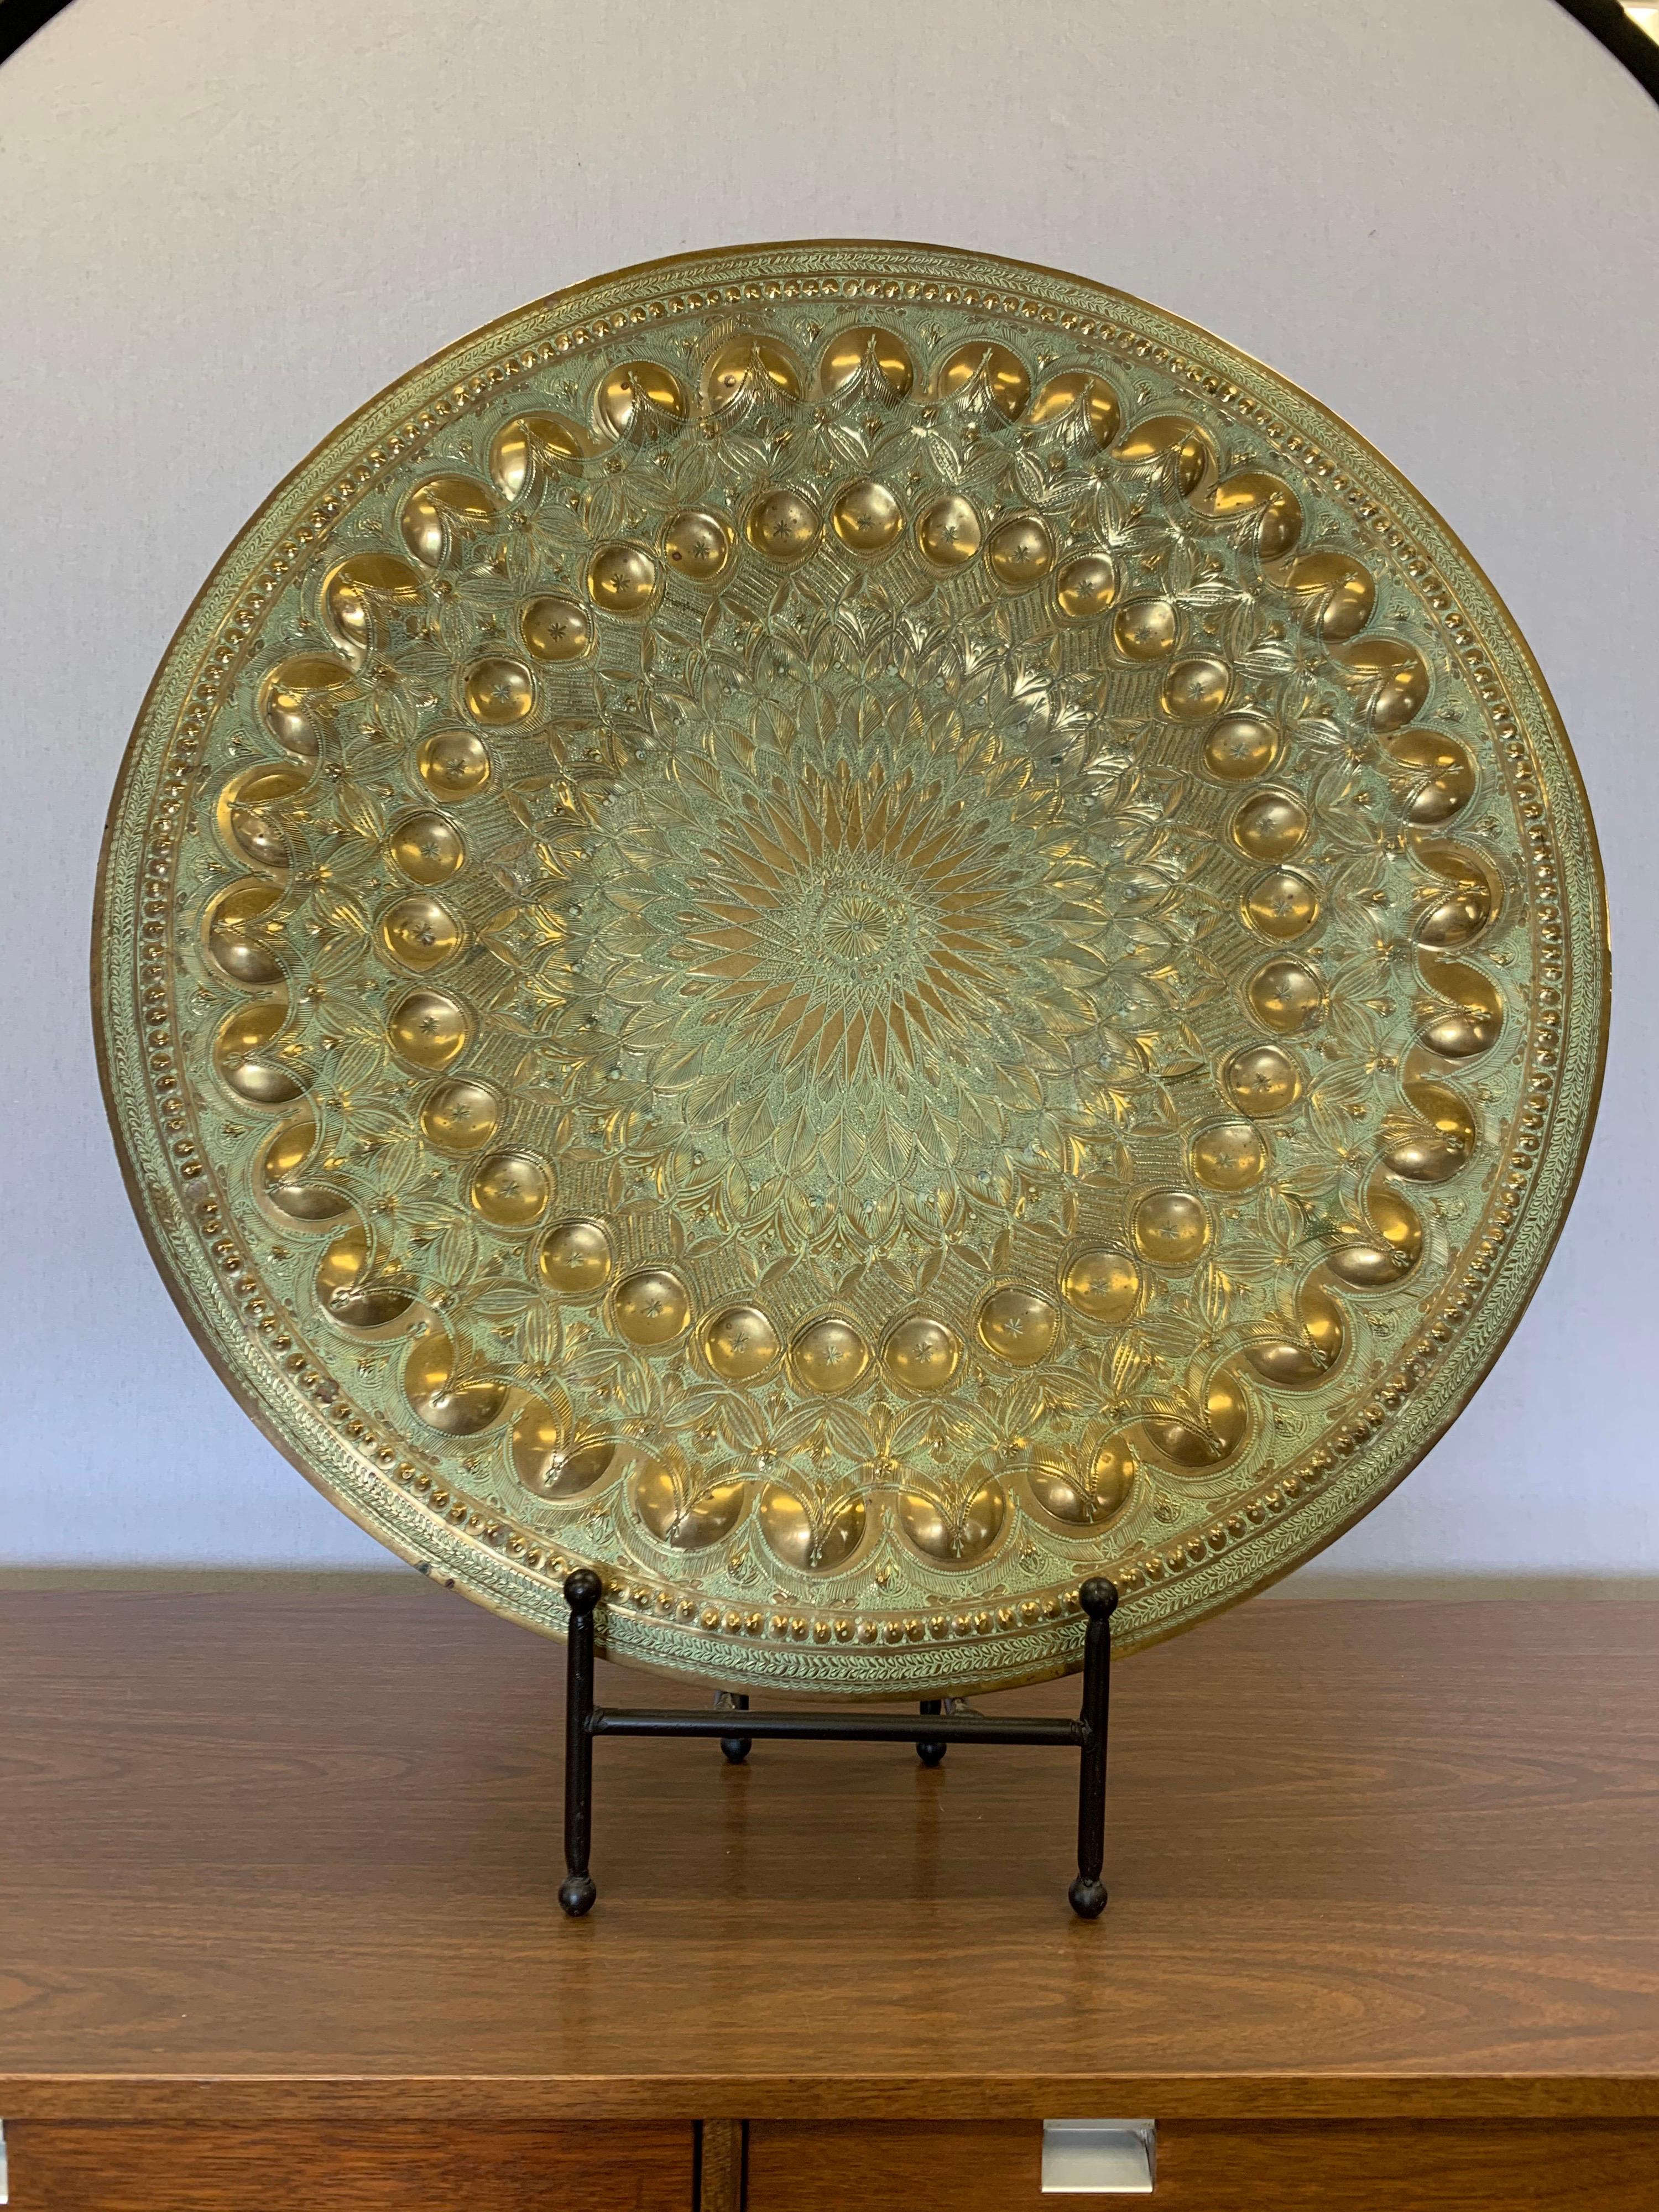 Moorish hammered round brass plaque with a pattern of engraved and embossed circles and feathers. Color is brass with seafoam green.